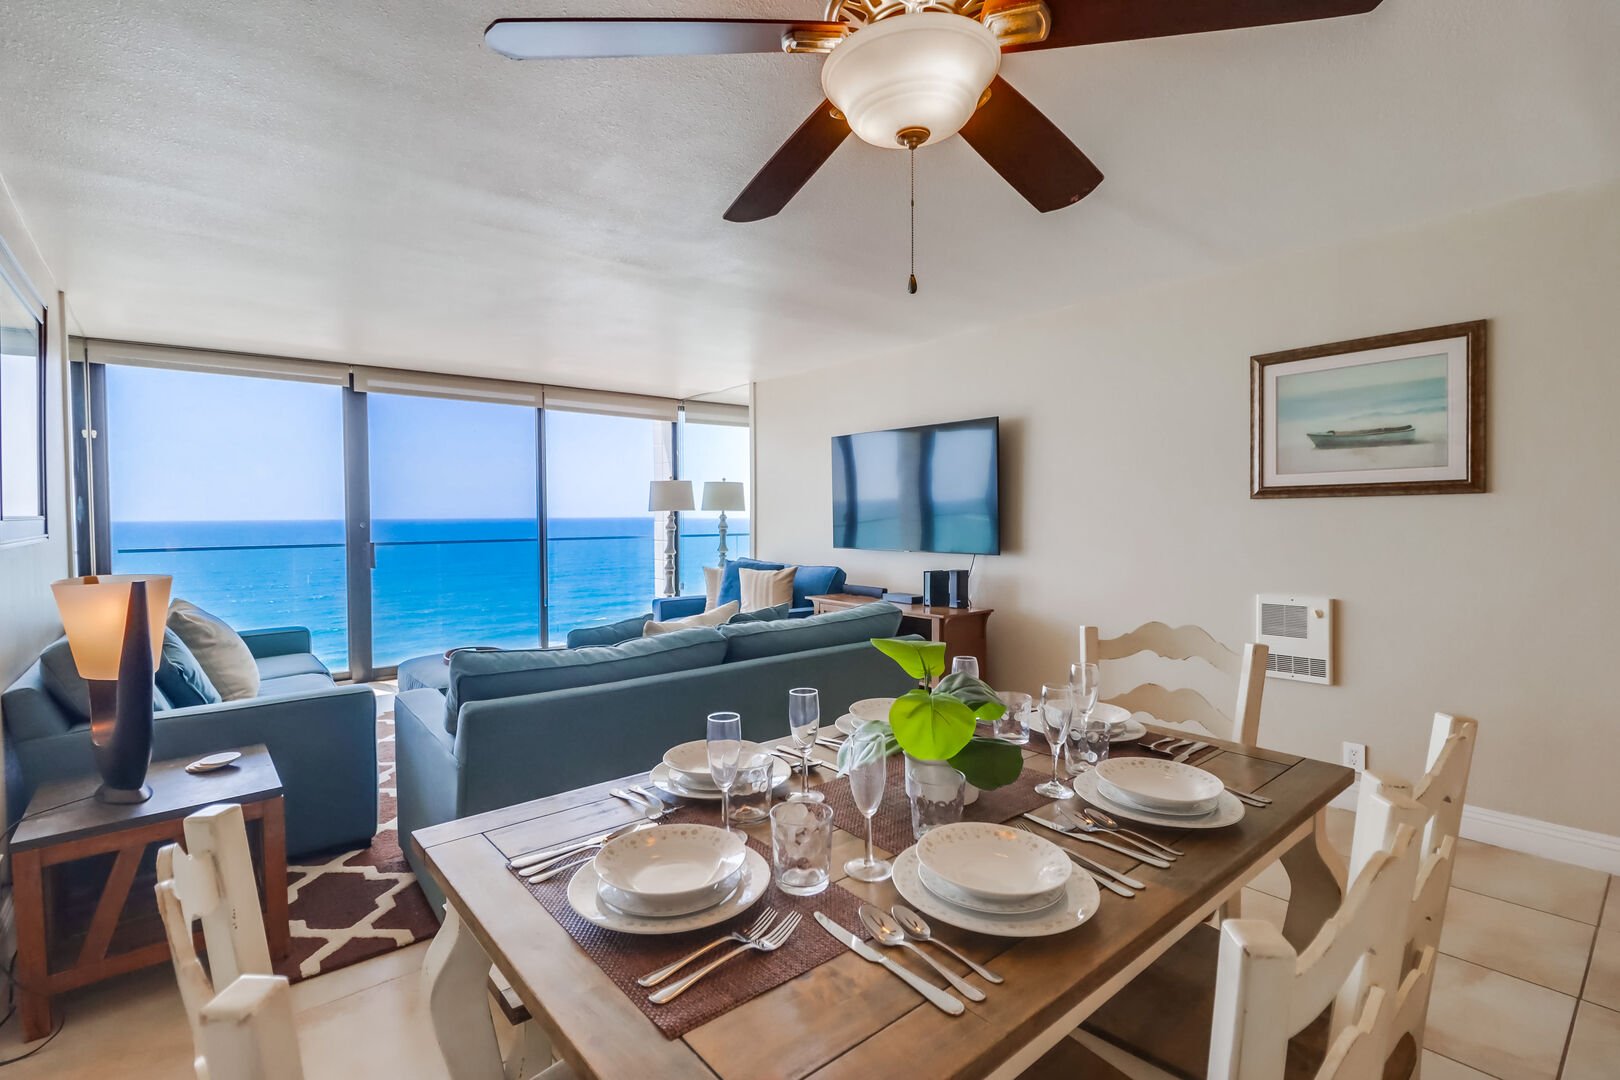 Dining table for 6 guests, one side with a long bench. Ceiling fan and ocean views - beach lifestyle in luxury!